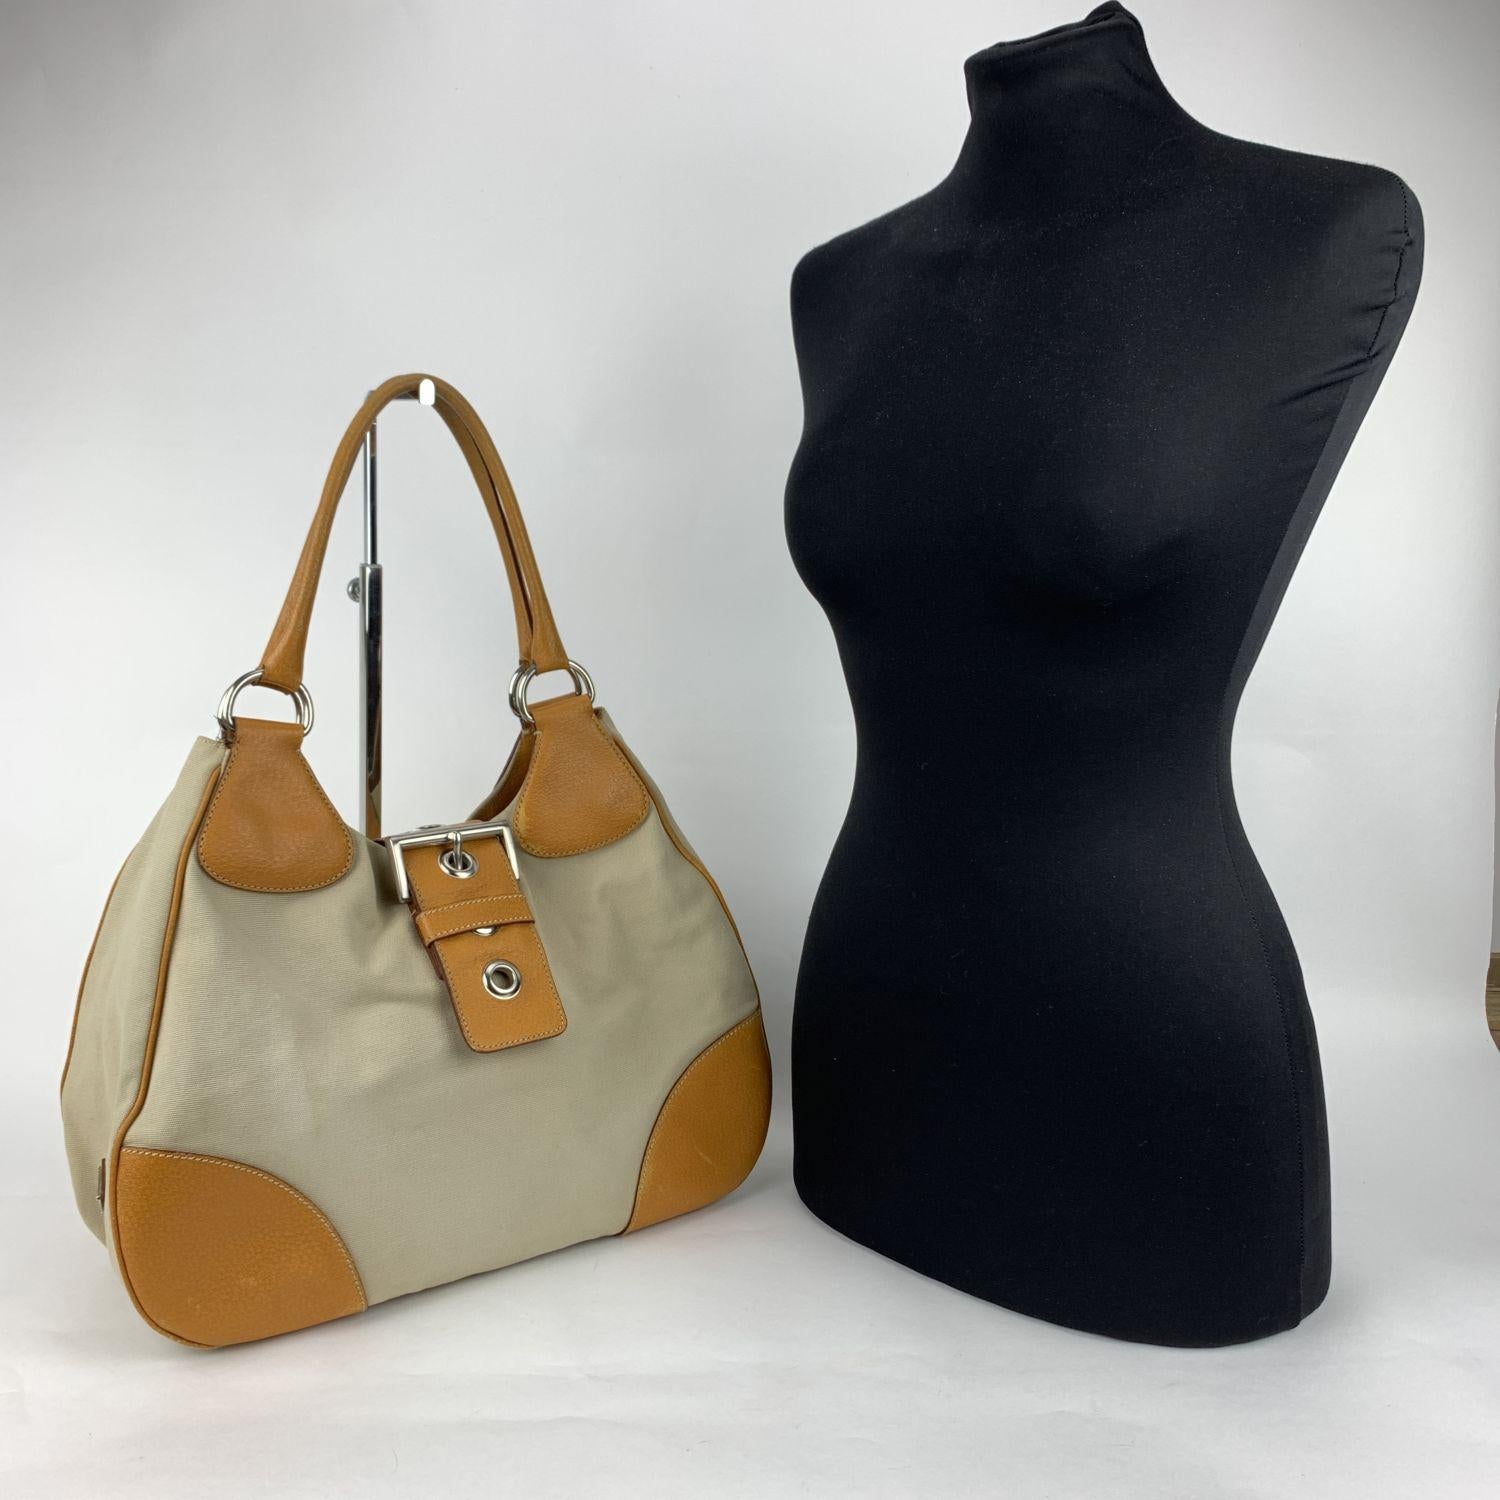 PRADA Tessuto Buckle Hobo . Contemporary design and an edgy bold look. Beige 'Tessuto' canvas and tan leather trim . Fold over strap belt with buckle detail . Silver metal hardware. PRADA signature lining . 1 side zip pocket inside.PRADA triangle